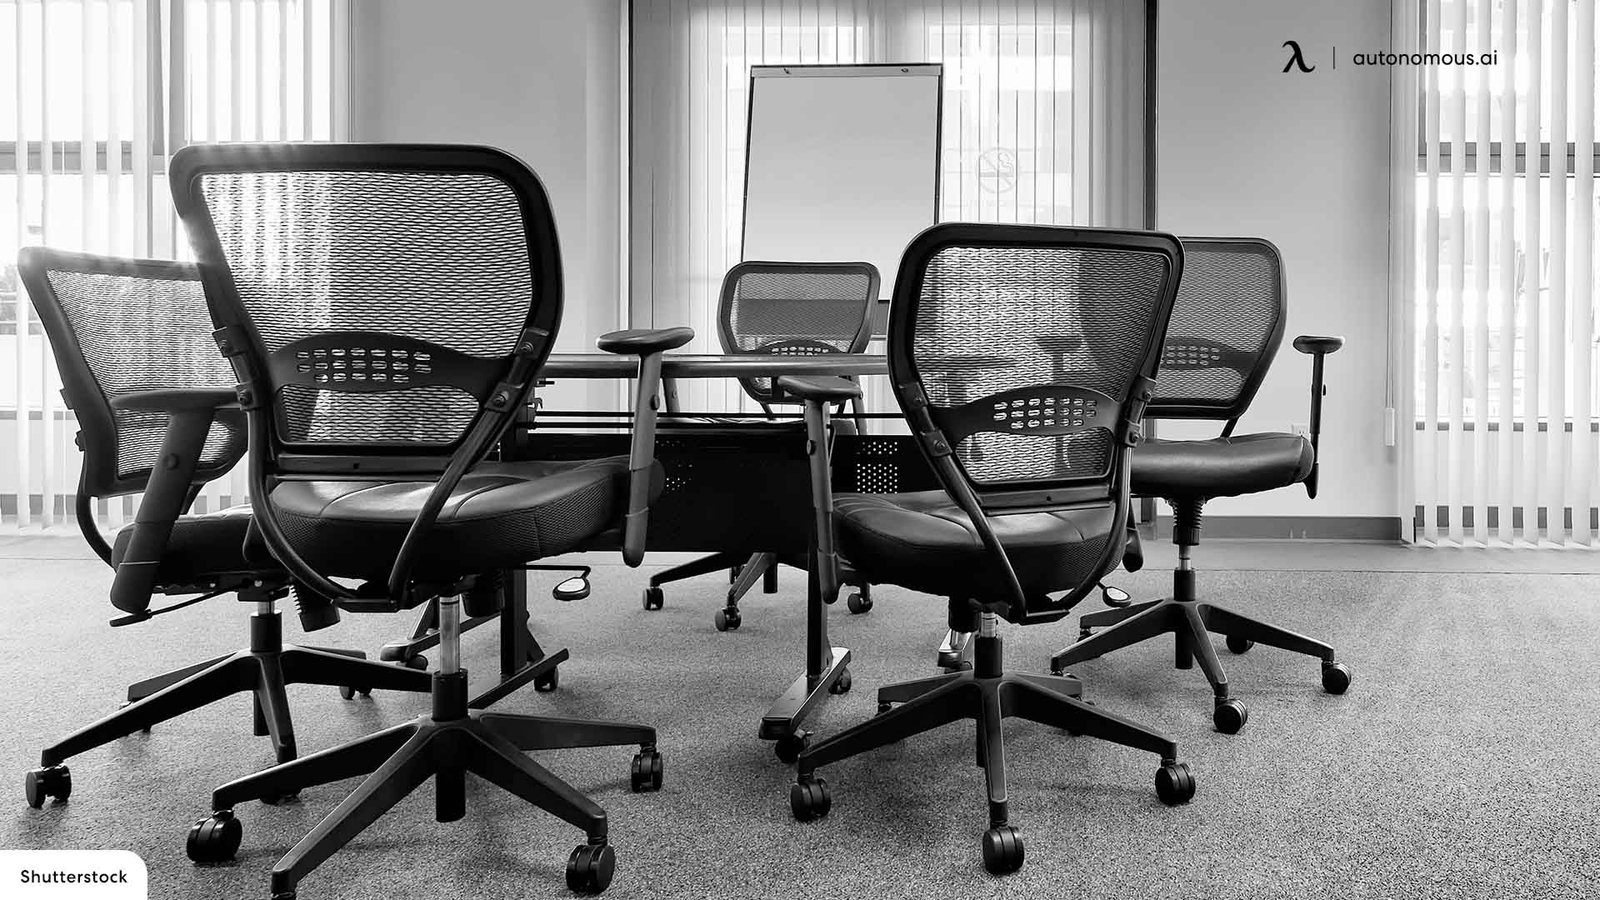 Top 20 Mesh Office Chairs with Stylish & Comfortable Design